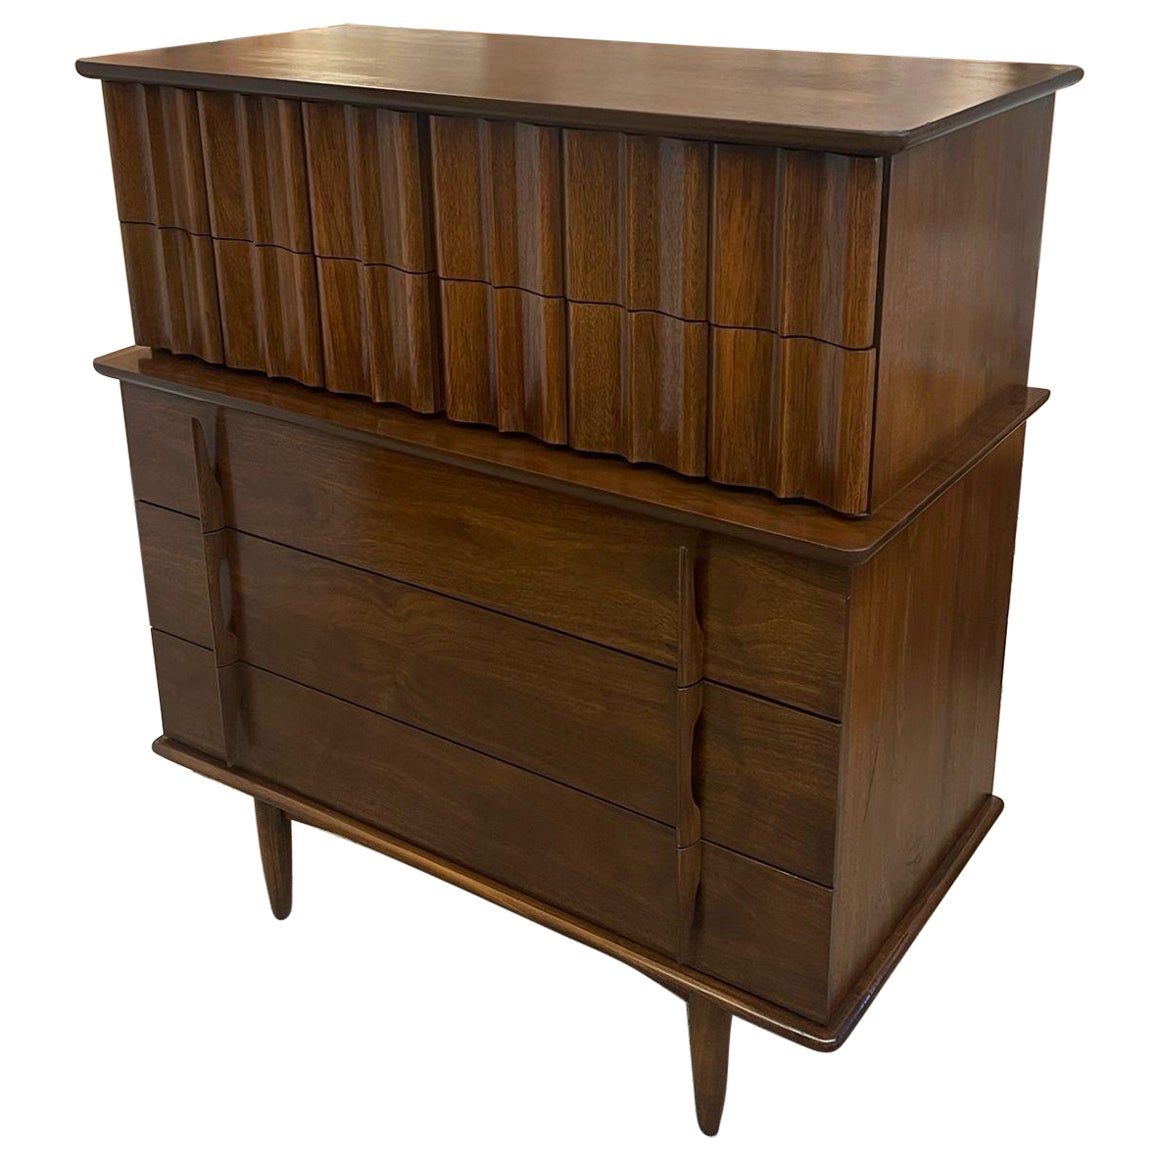 Vintage Mid Century Modern Highboy Dresser by United With Sculpted Wood Front. For Sale